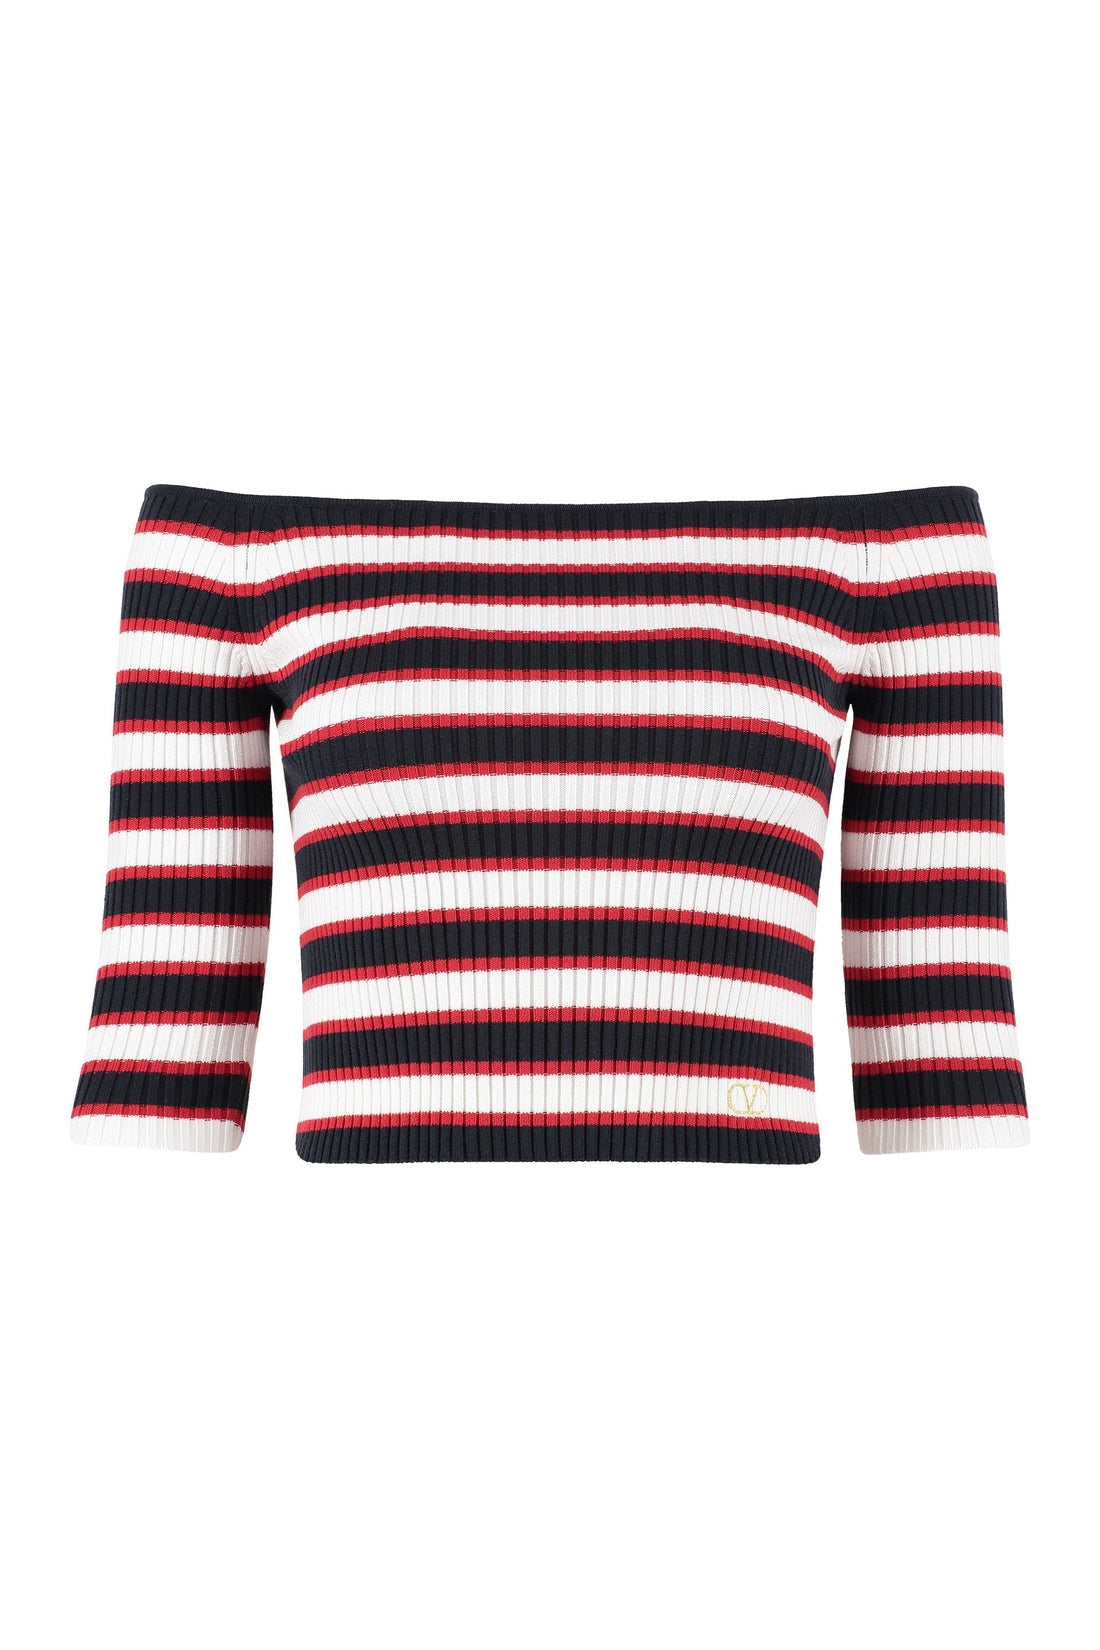 Valentino-OUTLET-SALE-Ribbed knit crop top-ARCHIVIST